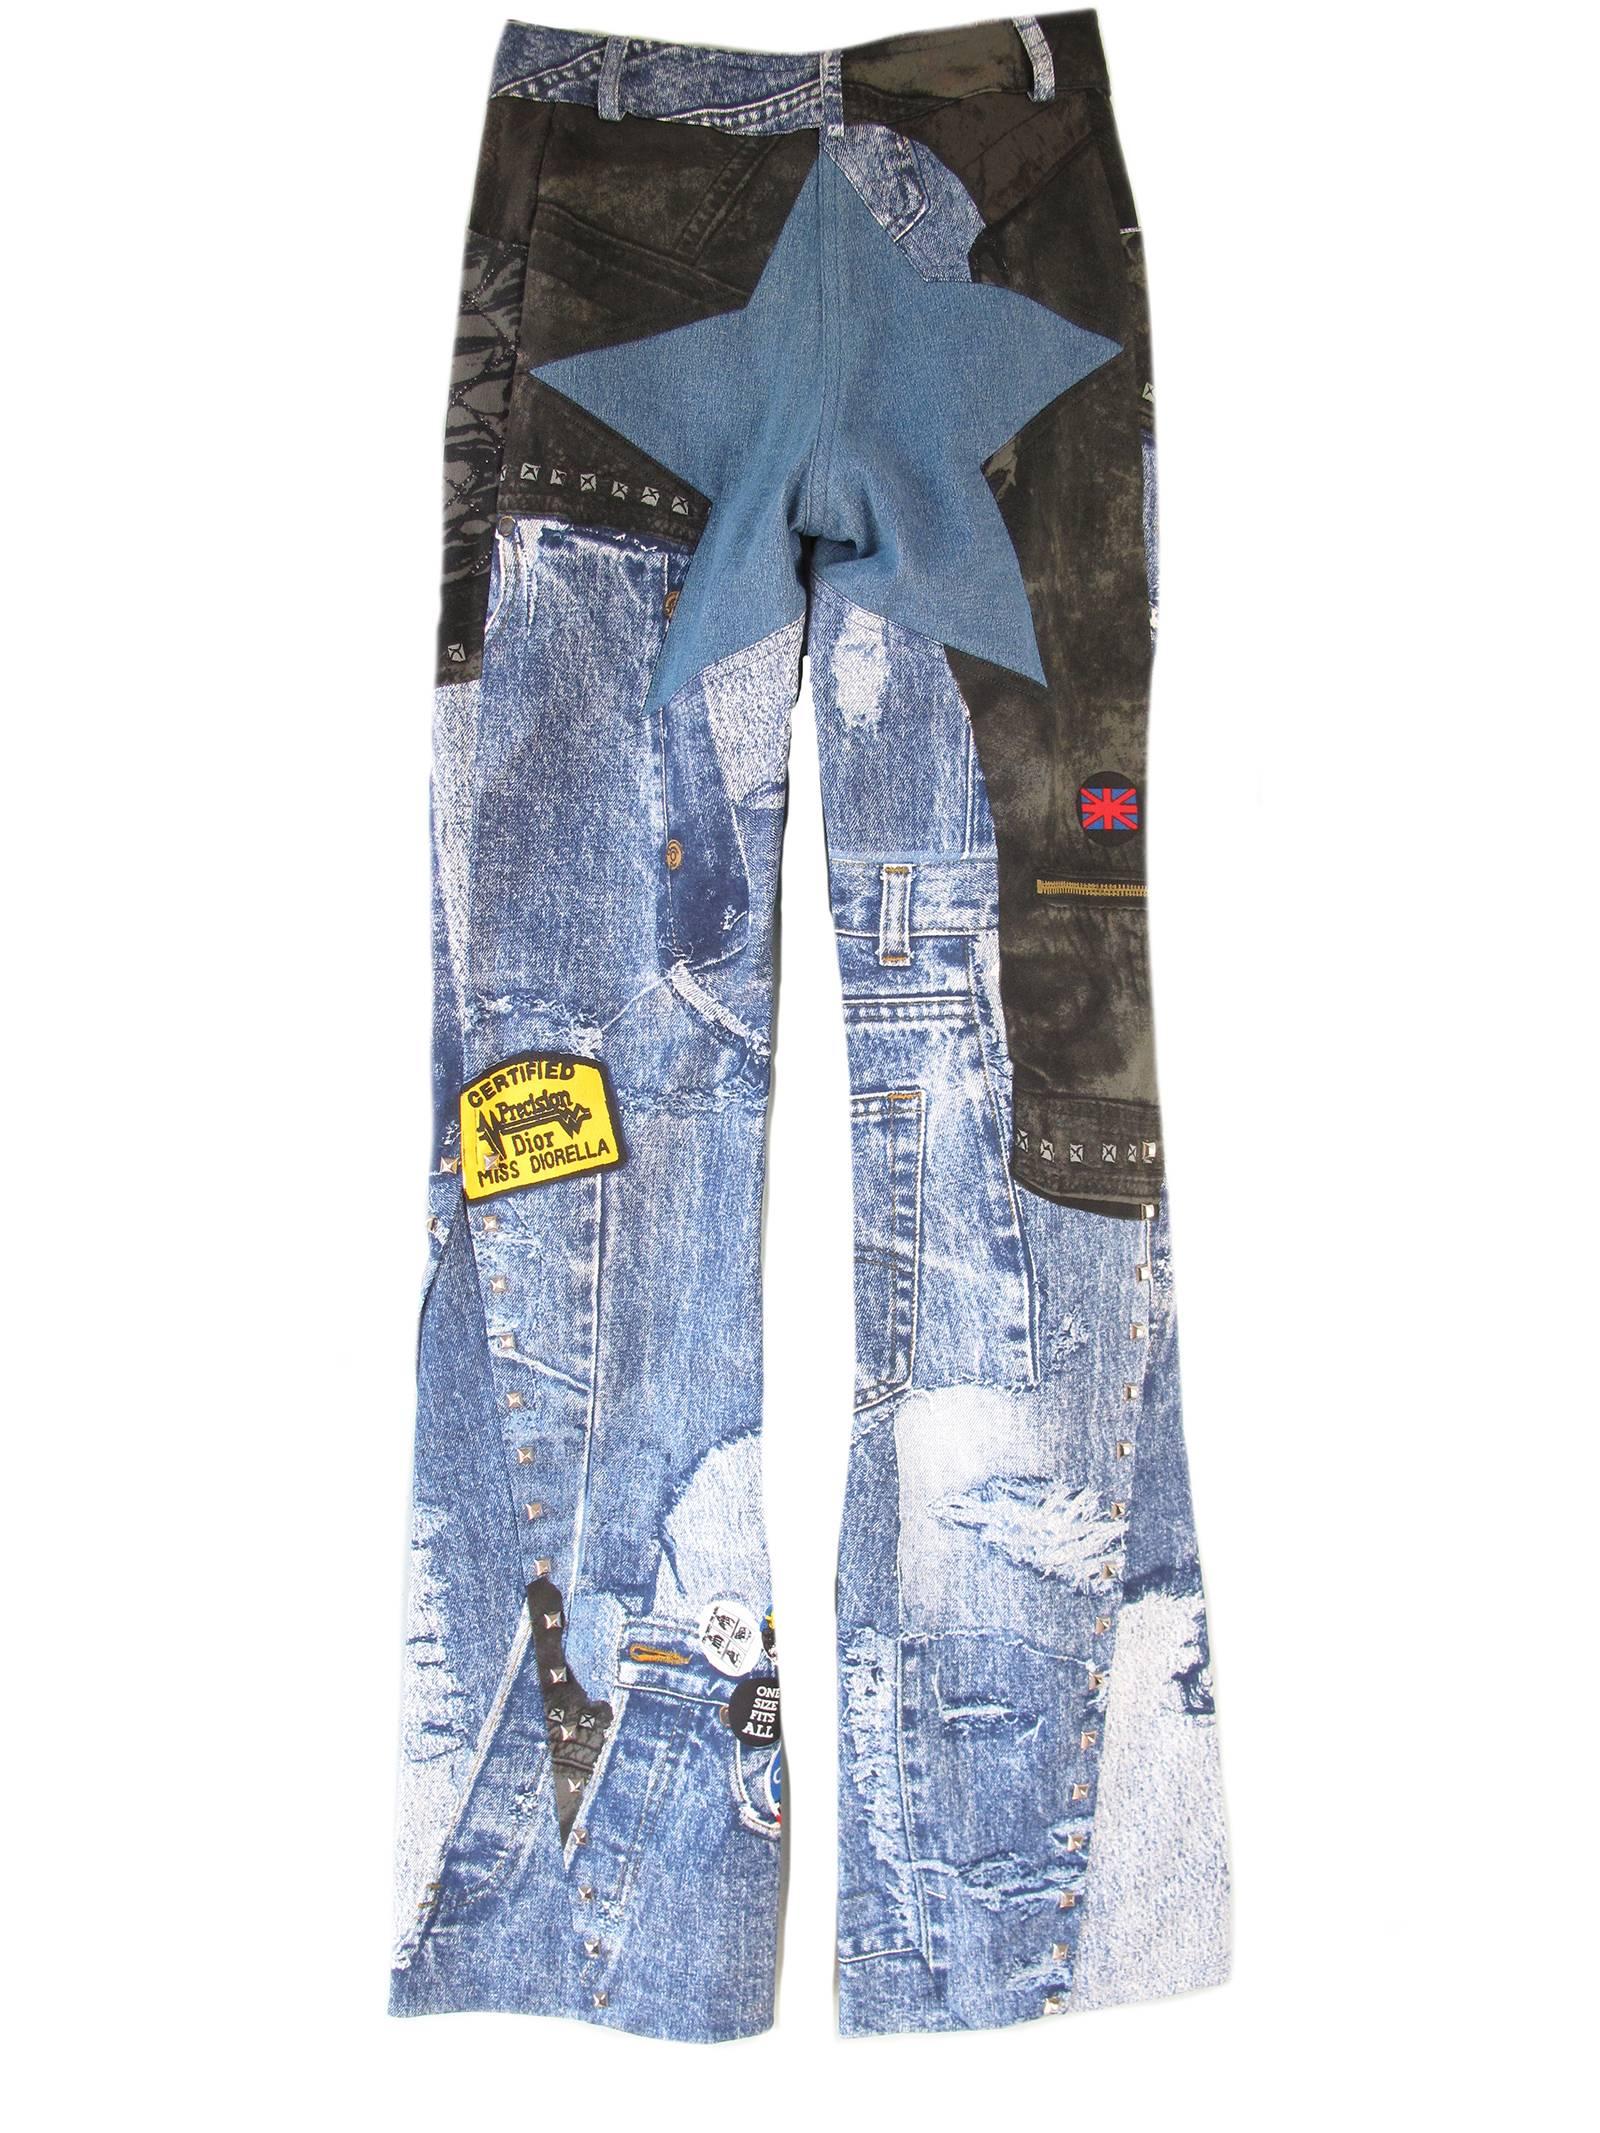 Christian Dior flared stretch jeans with studs and faux patches.  Size XS
24